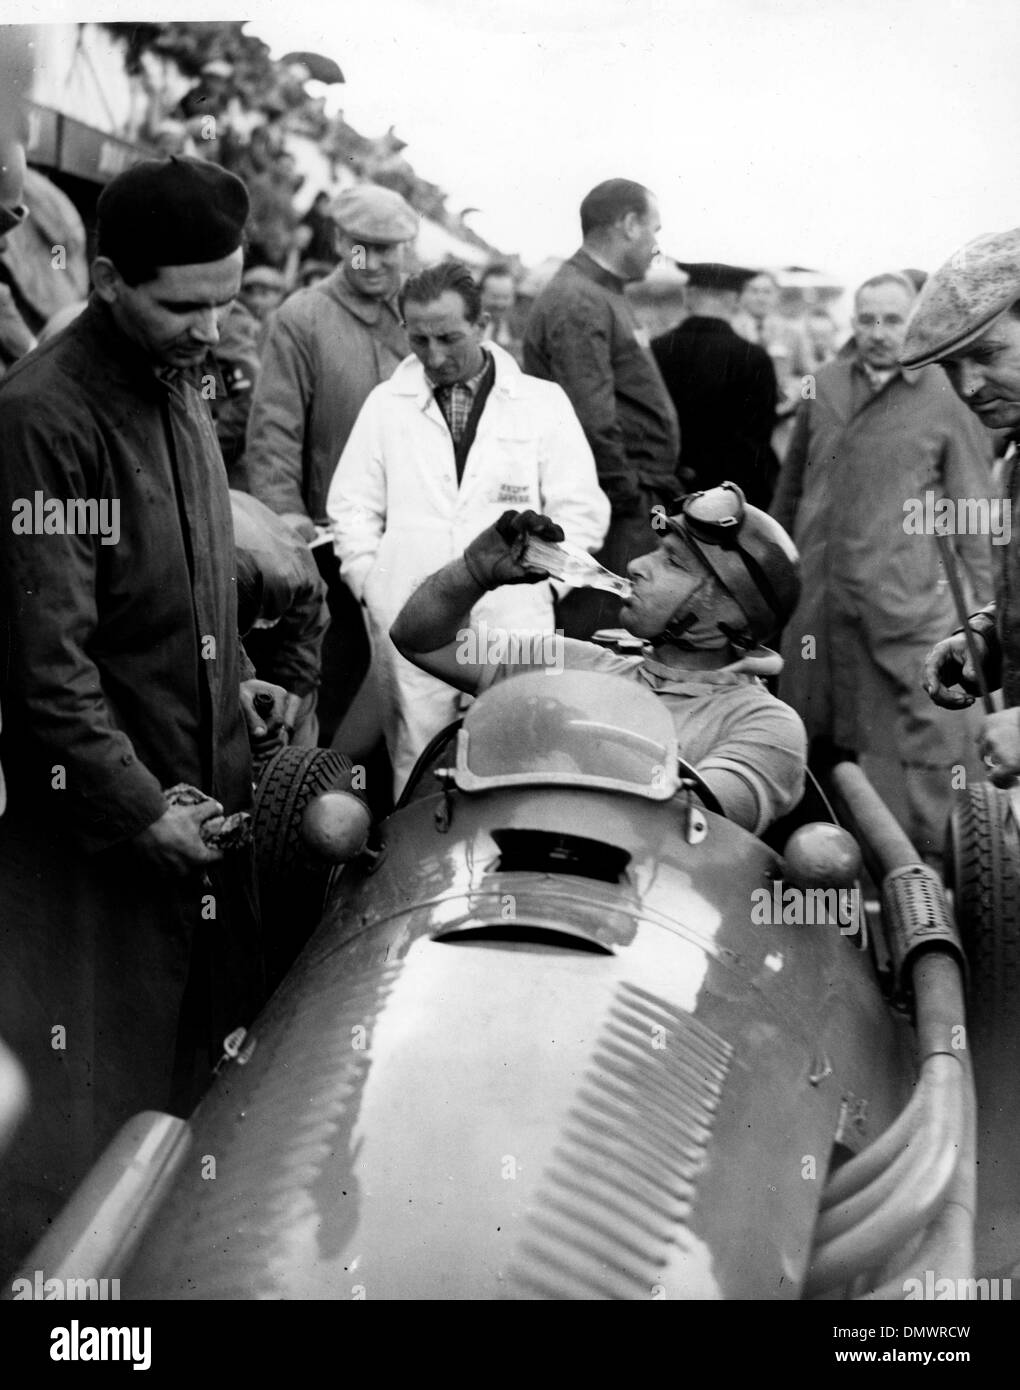 Silverstone shows Black and White Stock Photos & Images - Alamy